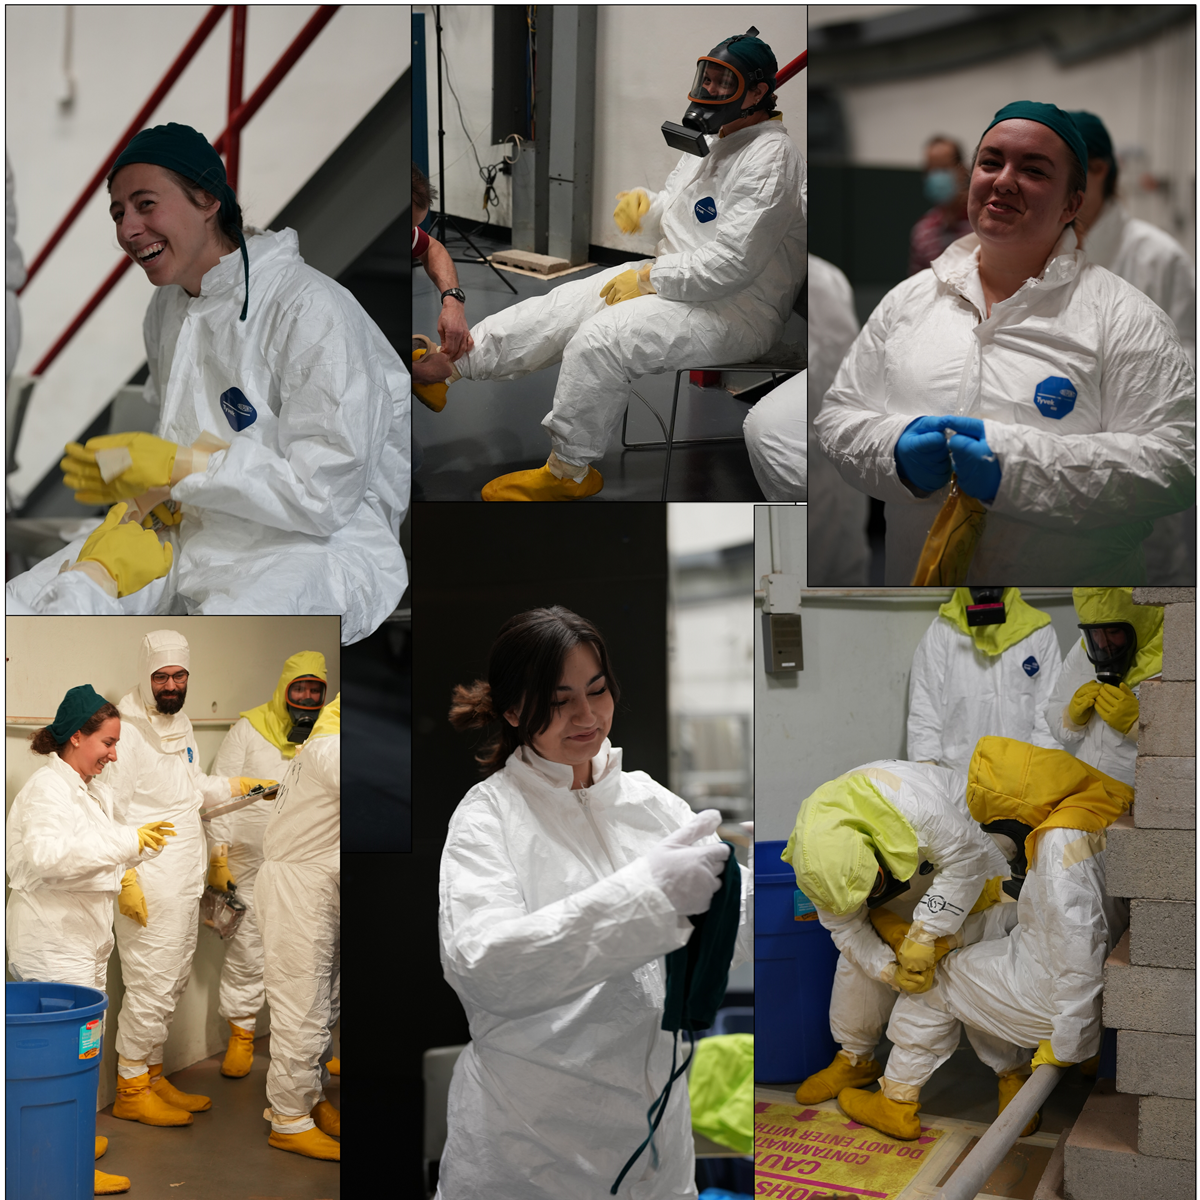 Assortment of Health Physics students wearing different levels of radiation protection gear before a class practical exercise. On female student, smiling, sits in a chair while taping her protective gloves on.  Another student wearing a full face respirator, sits in a chair while the teacher helps her put on her shoe covers.  Another smiling student, opens her shoe covers while wearing gloves and a tyvek suit.  A female student, wearing a protective suit, smiles while prepping her skull cap prior to wearing a respirator.  Two groups of students are in various stages of removing their protective gear around a radiation control point carrying clipboards, and radiation detectors.